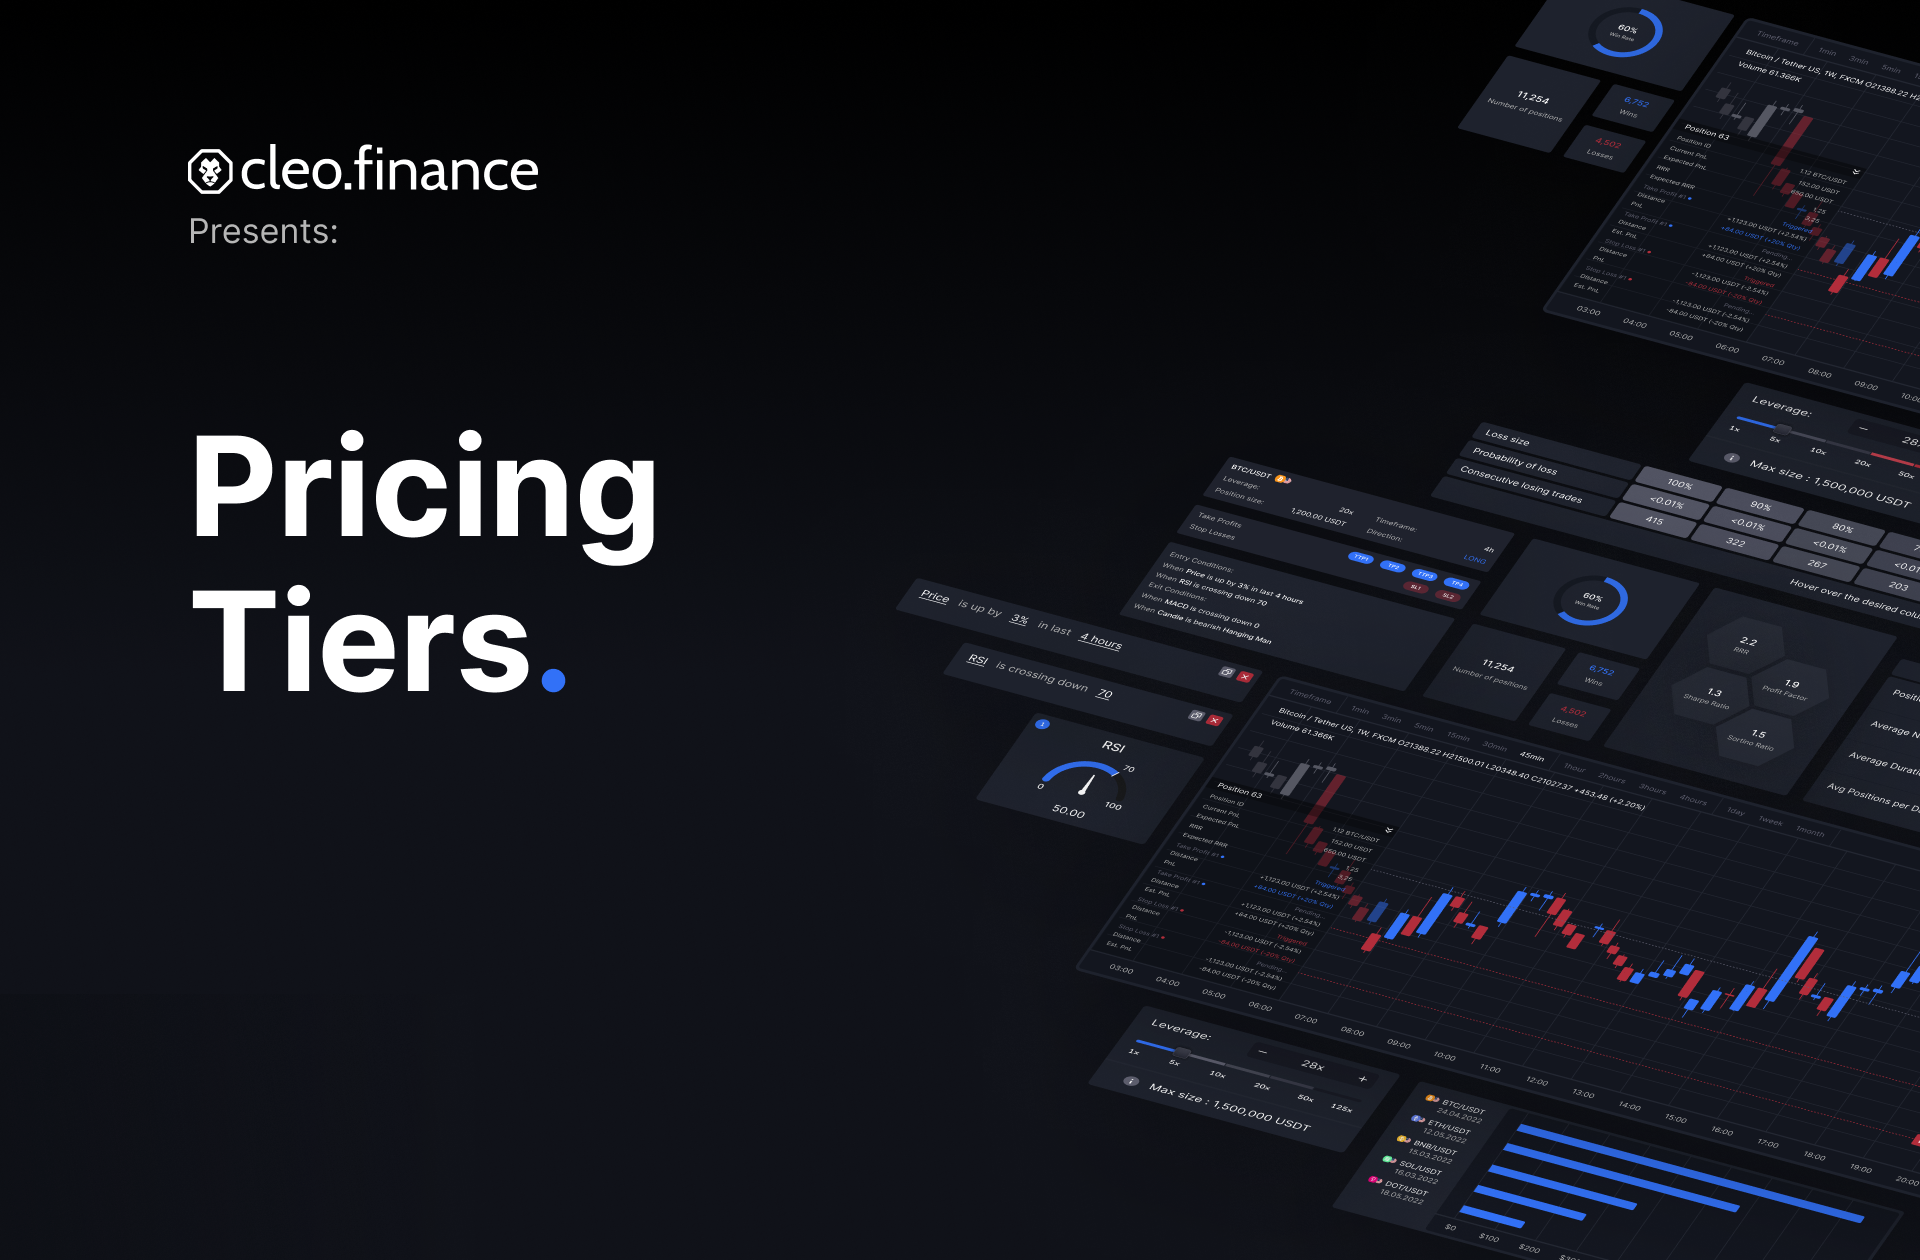 cleo.finance announces changes into their pricing tier structure